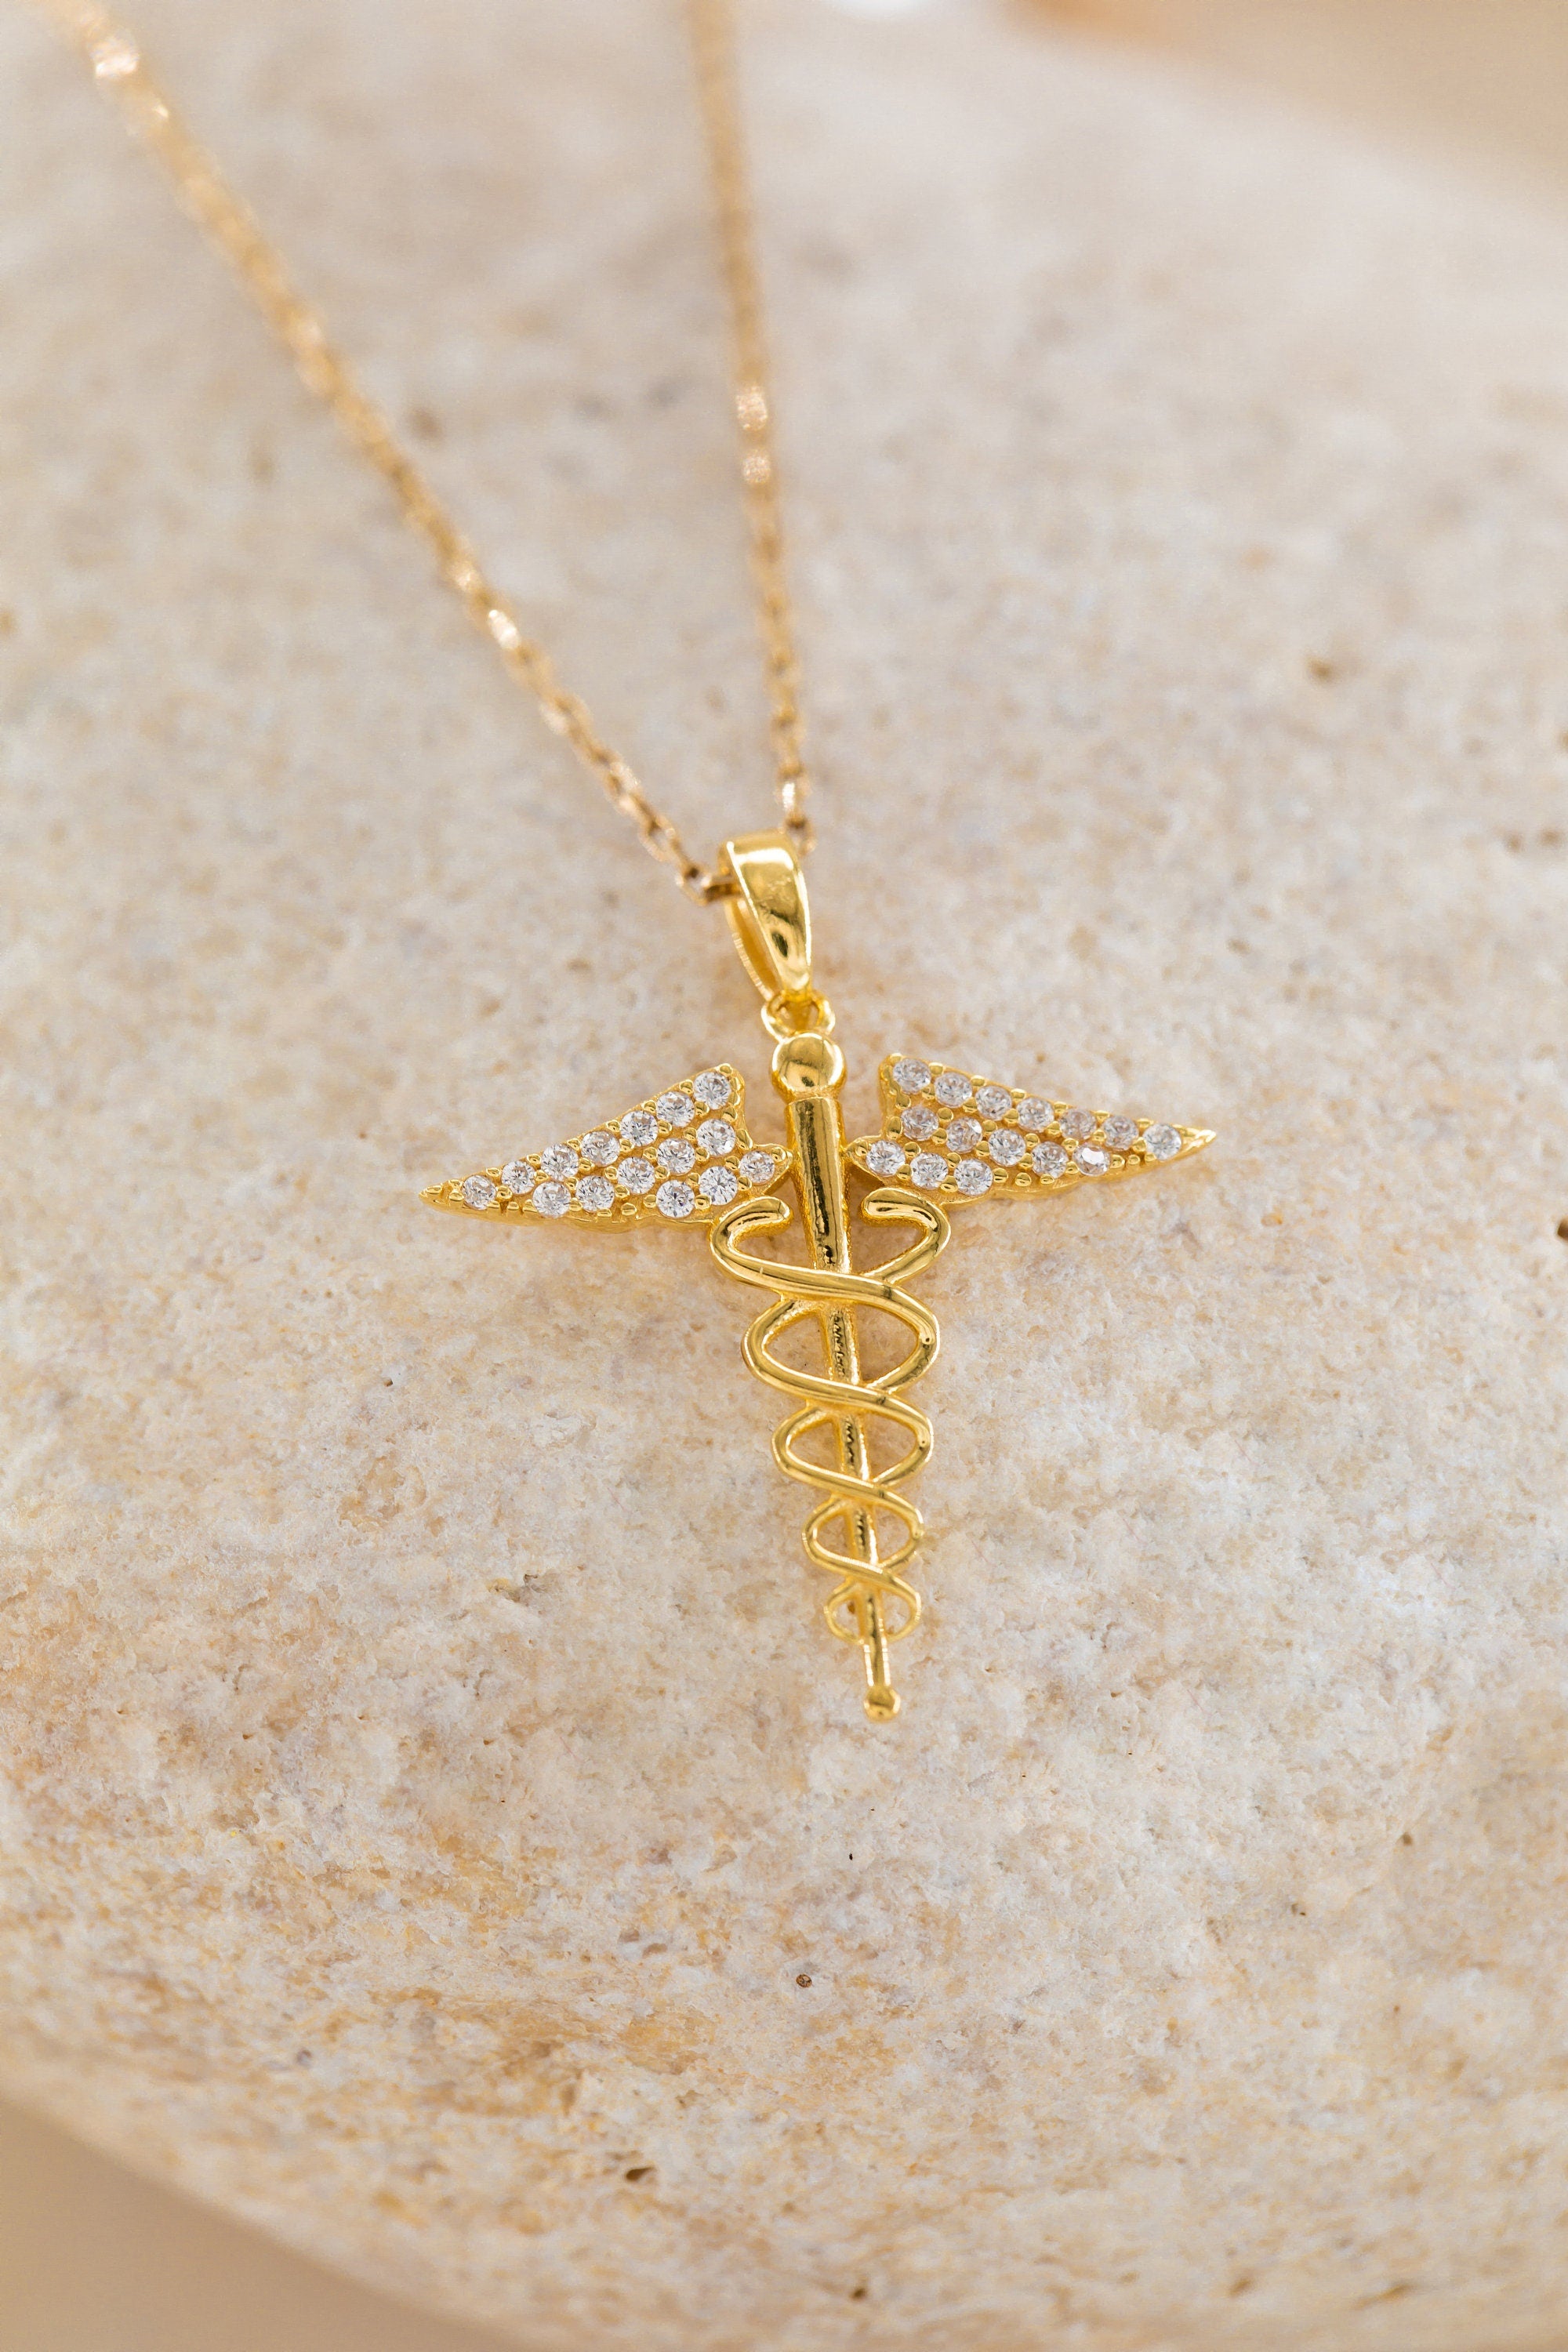 14k Necklace Caduceus Symbol Necklace Hermes Necklace Gold Pendant Gift for Her Sterling Silver Pendant for Doctor's Gift